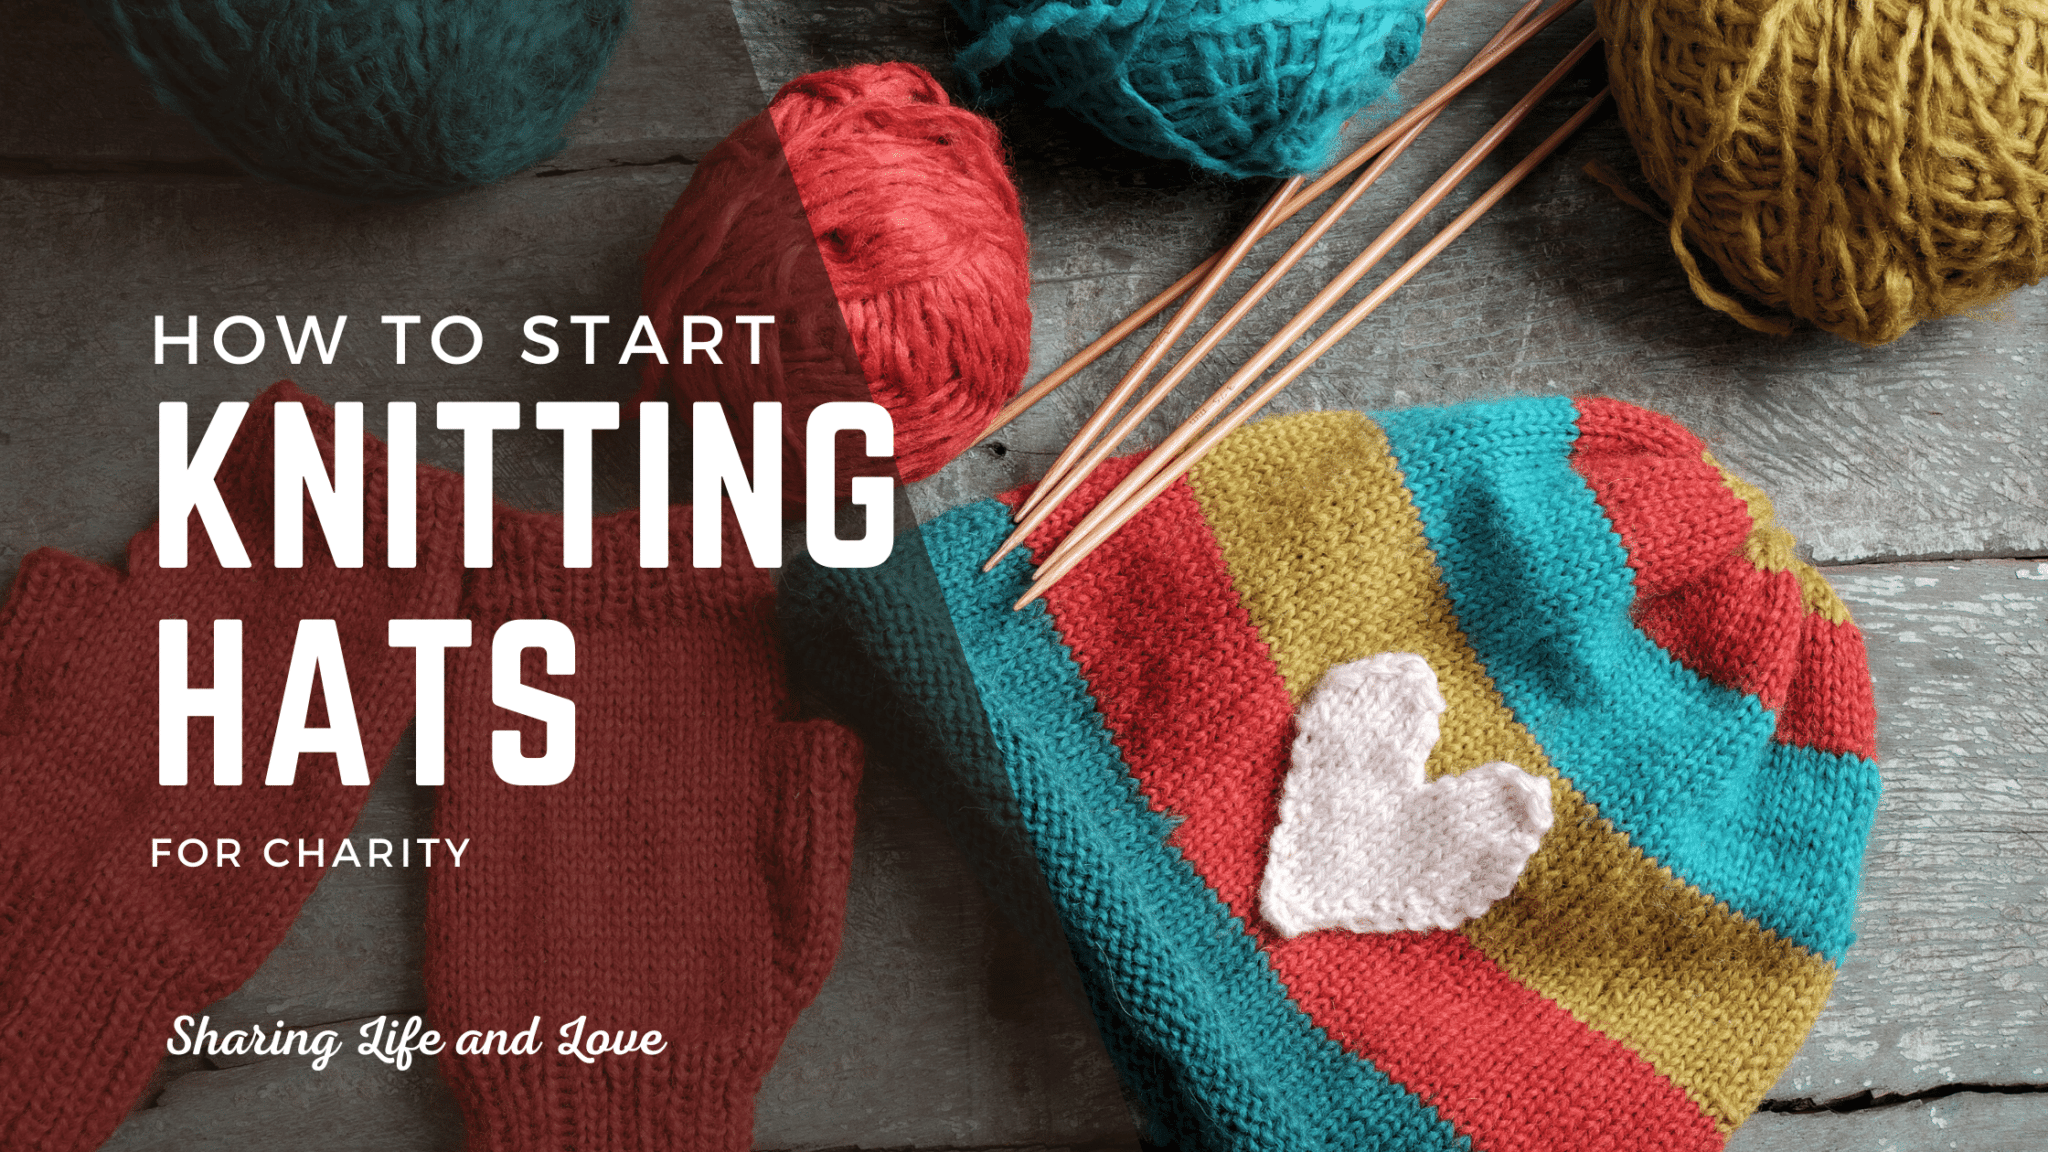 Knitting Hats For Charity Your How To Guide Sharing Life And Love 